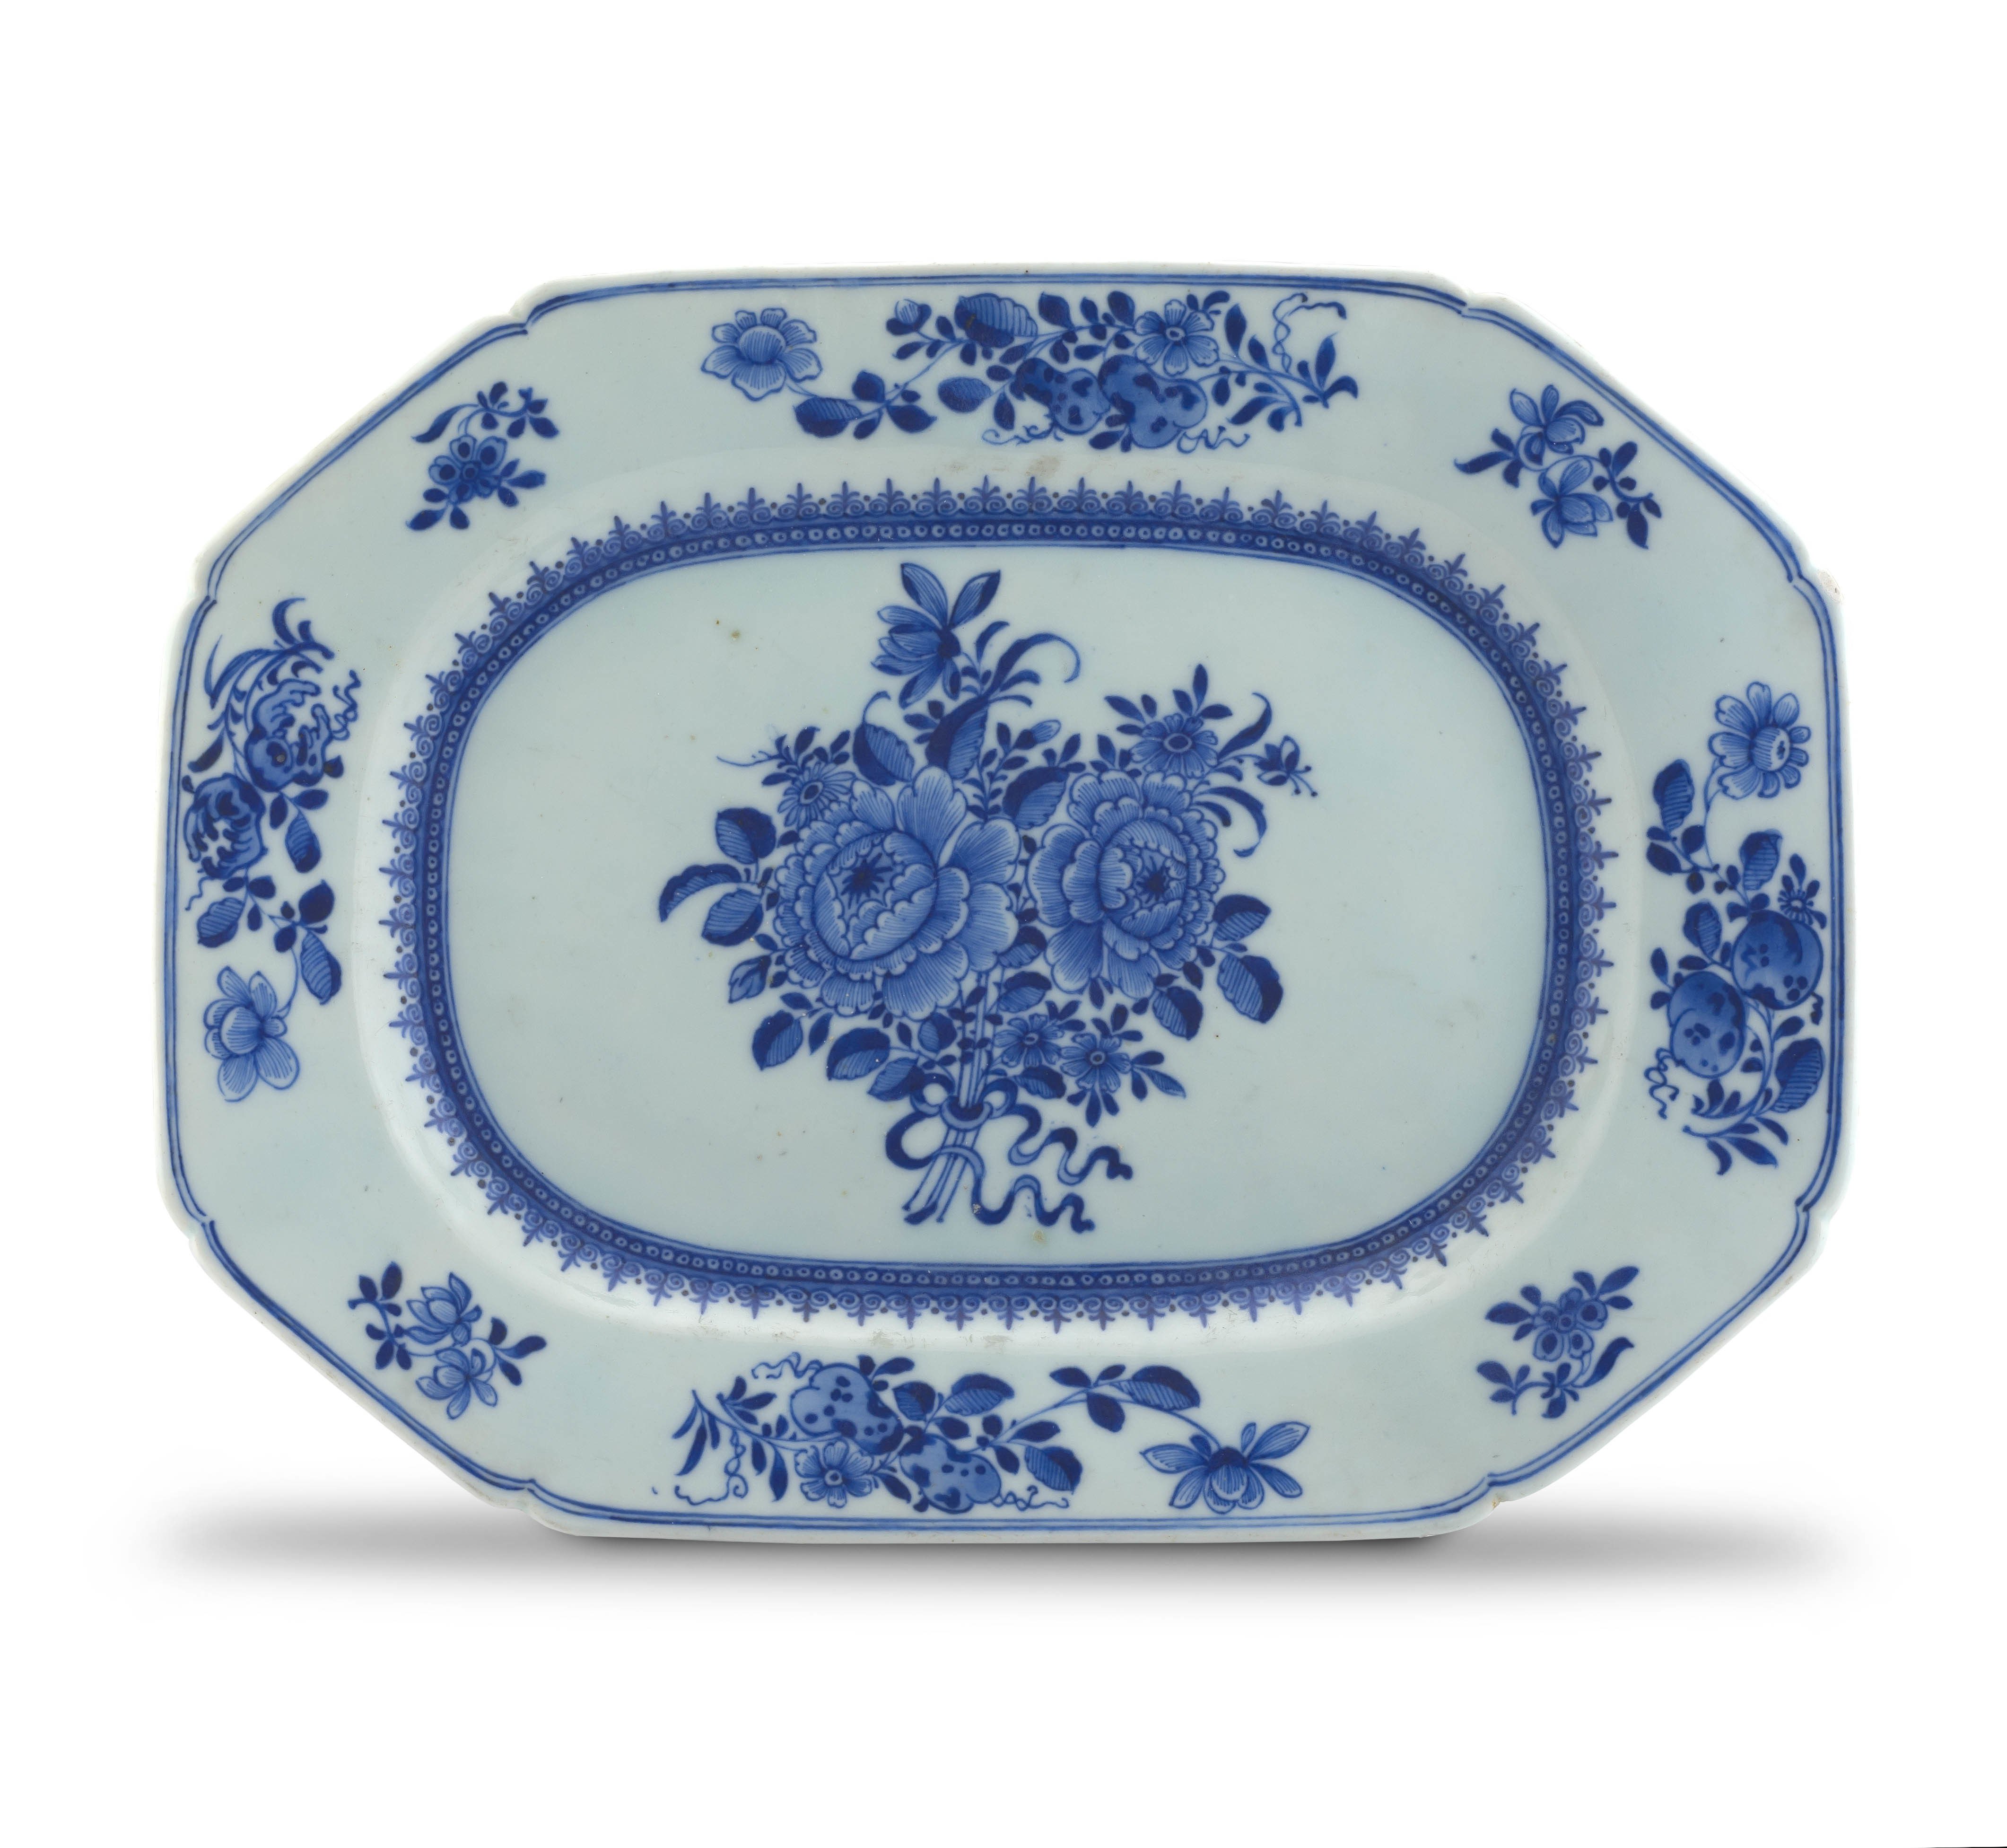 A Chinese Export blue and white octagonal plate, Qianlong period, 1735-1796